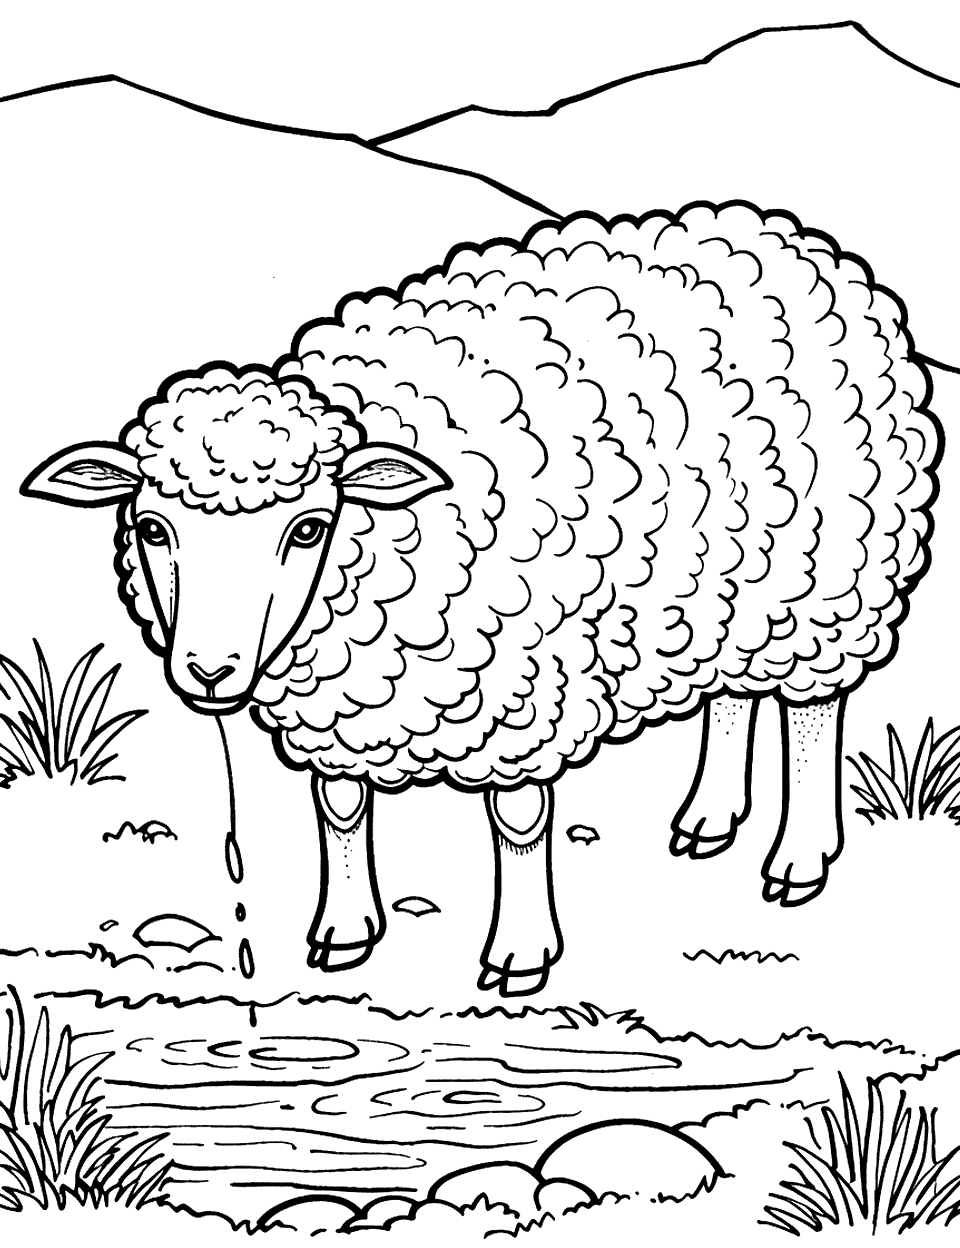 Sheep by the Brook Coloring Page - A sheep drinking water from a clear brook in a serene setting.